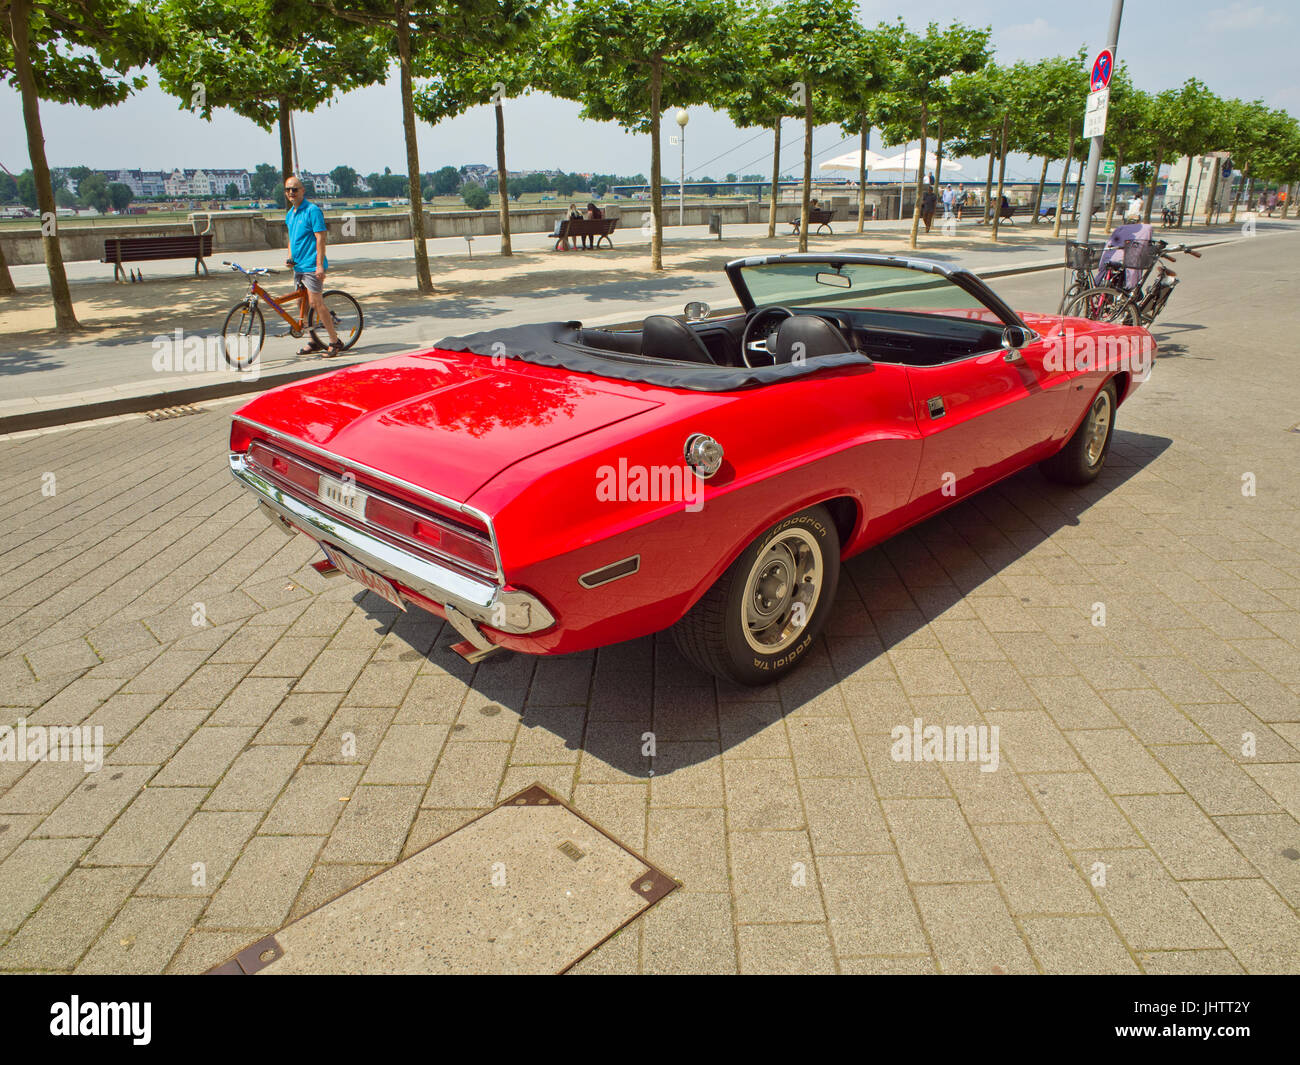 Red Dodge Challenger Convertible American Muscle Car Stock Photo